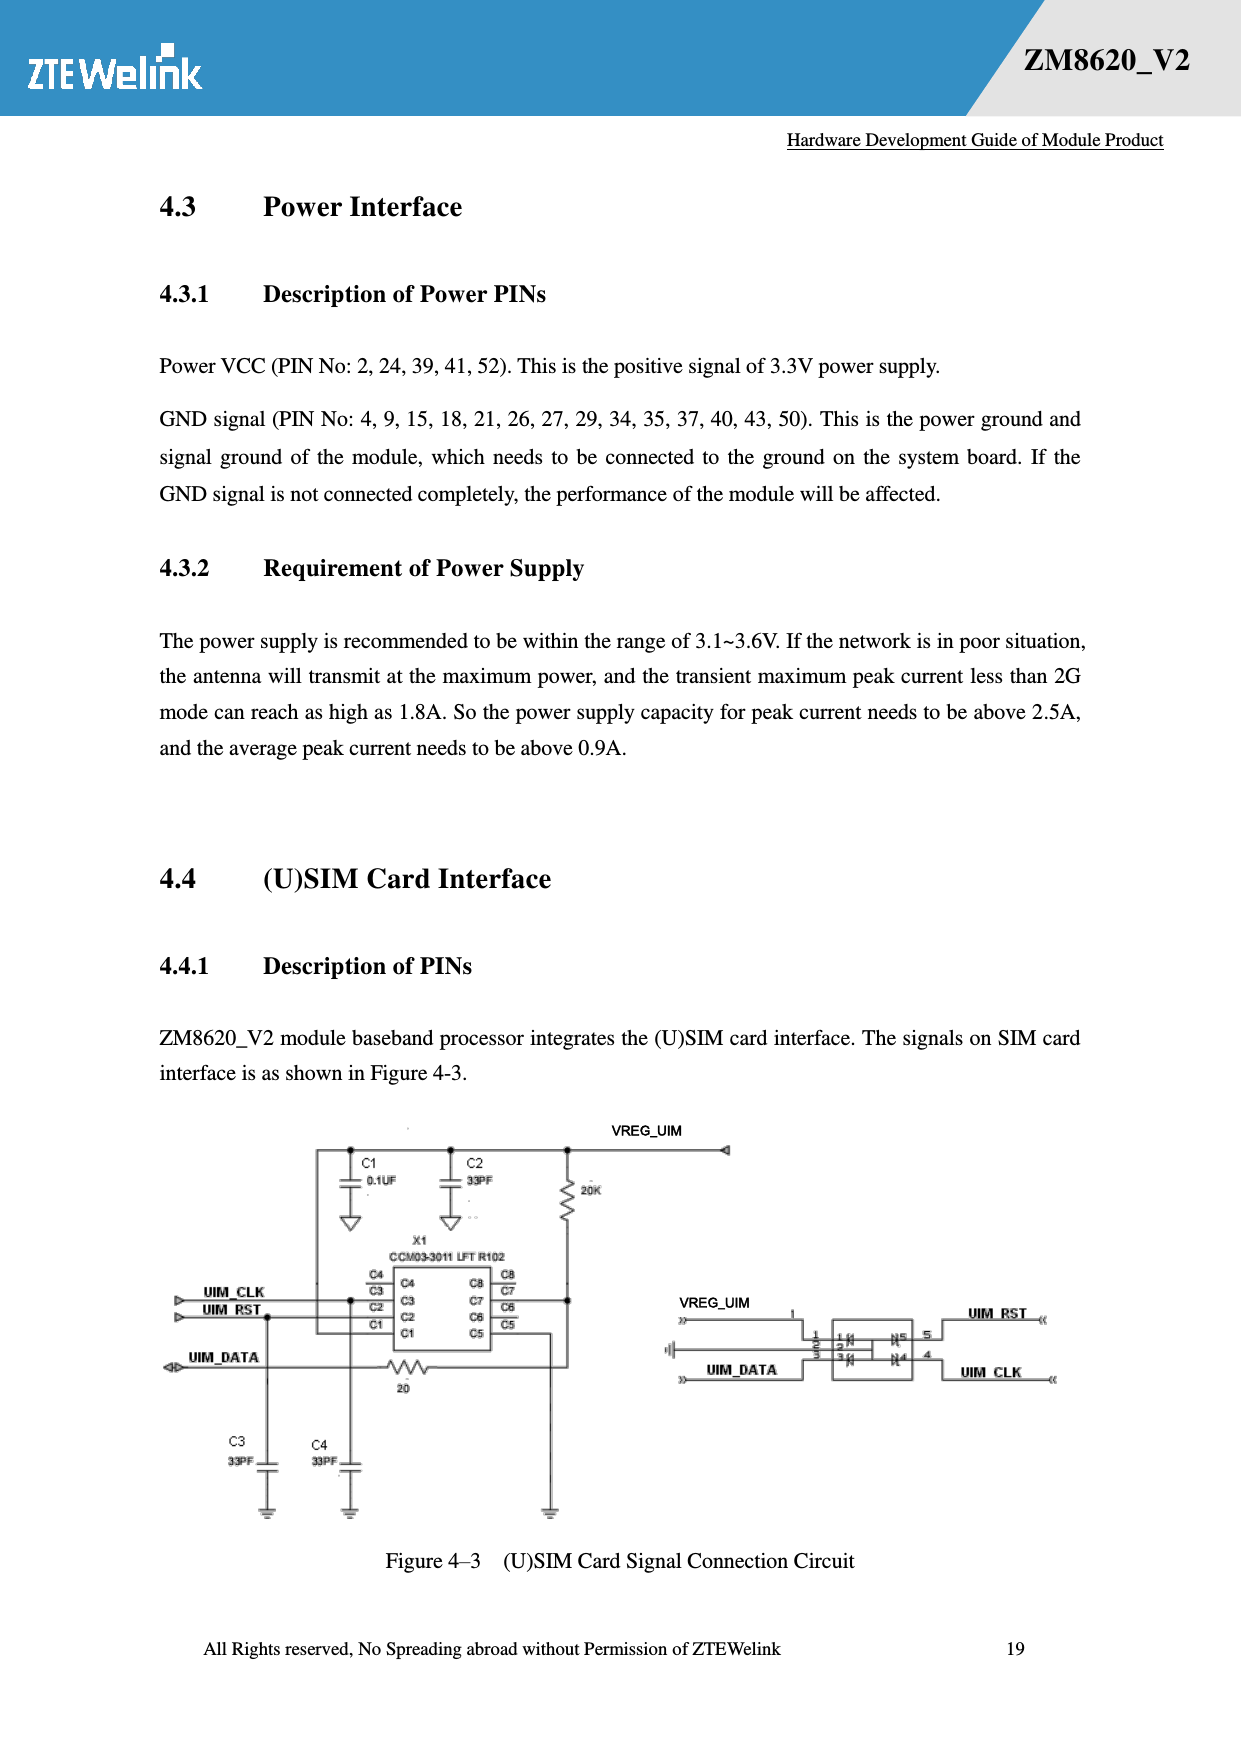   Hardware Development Guide of Module Product  All Rights reserved, No Spreading abroad without Permission of ZTEWelink              19 错误！未找到用源。    ZM8620_V2 4.3 Power Interface 4.3.1 Description of Power PINs Power VCC (PIN No: 2, 24, 39, 41, 52). This is the positive signal of 3.3V power supply.   GND signal (PIN No: 4, 9, 15, 18, 21, 26, 27, 29, 34, 35, 37, 40, 43, 50). This is the power ground and signal ground  of  the module,  which  needs  to  be  connected to  the ground  on  the system board.  If  the GND signal is not connected completely, the performance of the module will be affected.   4.3.2 Requirement of Power Supply The power supply is recommended to be within the range of 3.1~3.6V. If the network is in poor situation, the antenna will transmit at the maximum power, and the transient maximum peak current less than 2G mode can reach as high as 1.8A. So the power supply capacity for peak current needs to be above 2.5A, and the average peak current needs to be above 0.9A.    4.4 (U)SIM Card Interface 4.4.1 Description of PINs ZM8620_V2 module baseband processor integrates the (U)SIM card interface. The signals on SIM card interface is as shown in Figure 4-3.  Figure 4–3  (U)SIM Card Signal Connection Circuit VREG_UIM VREG_UIM 